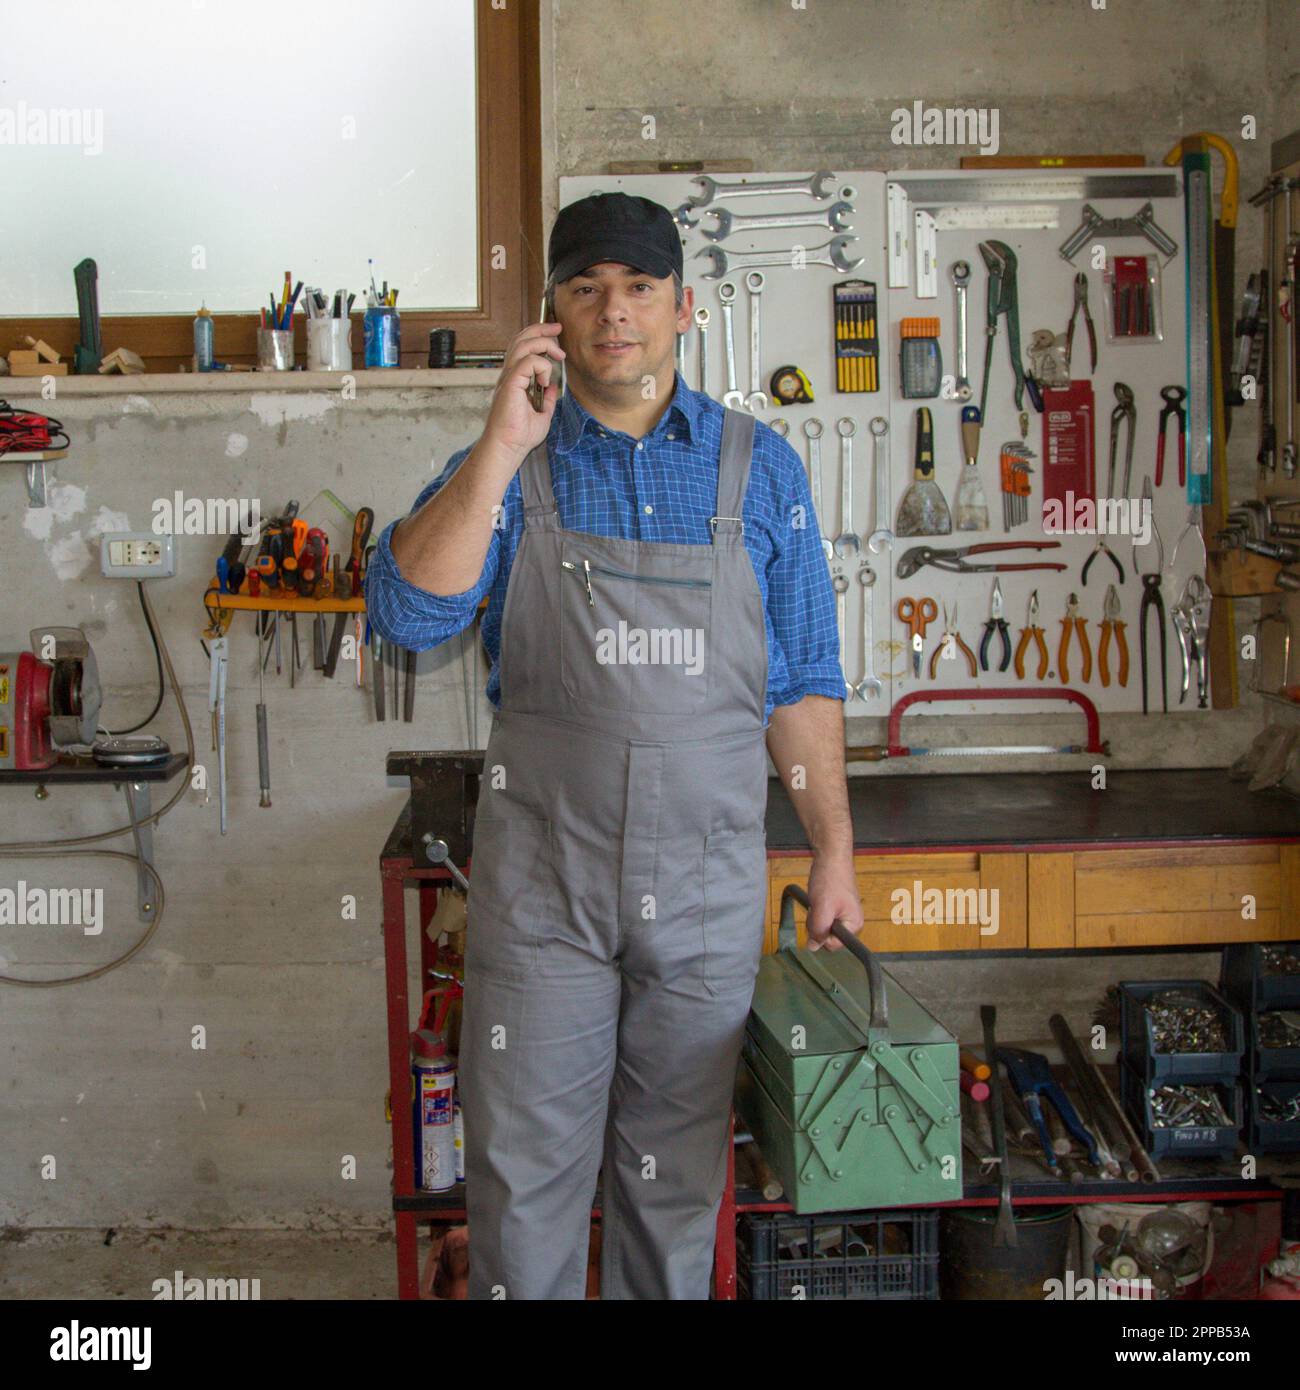 Image of a handyman in his workshop talking on the phone and holding a toolbox. Answering a call for work. Stock Photo